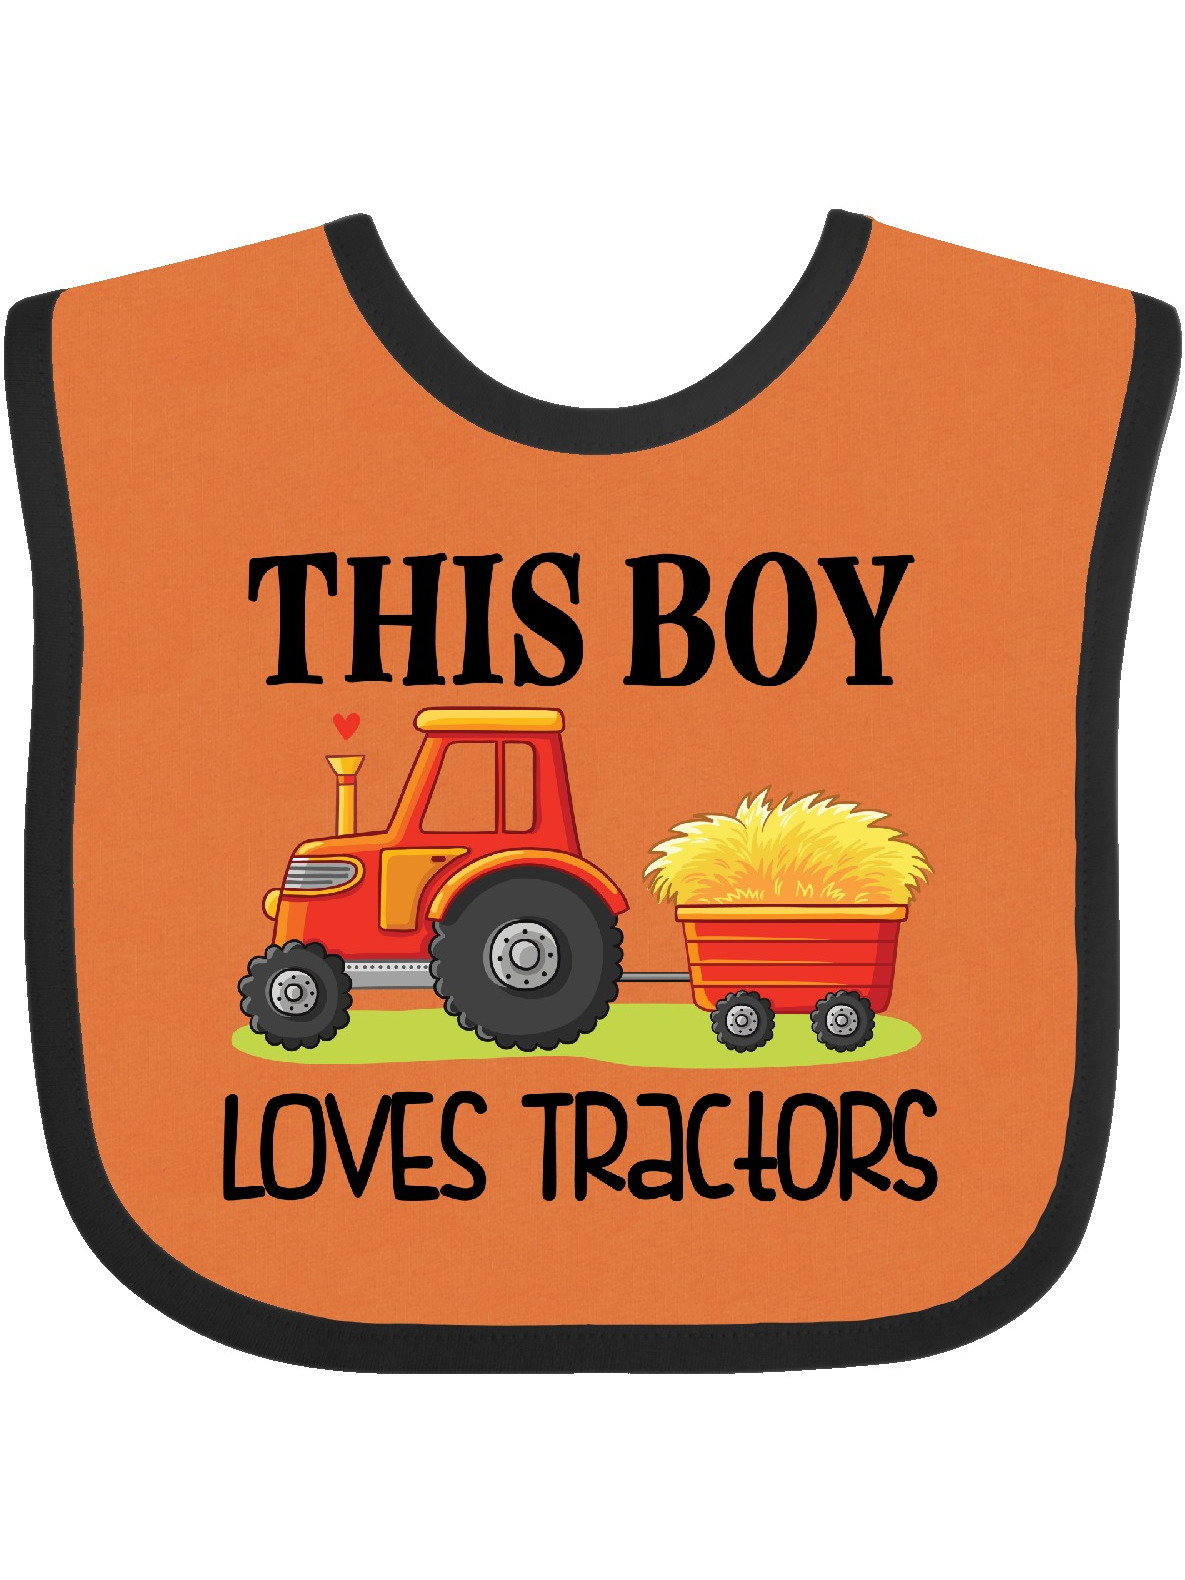 3-6 Months Baby Size Cute Farm Tractor Romper